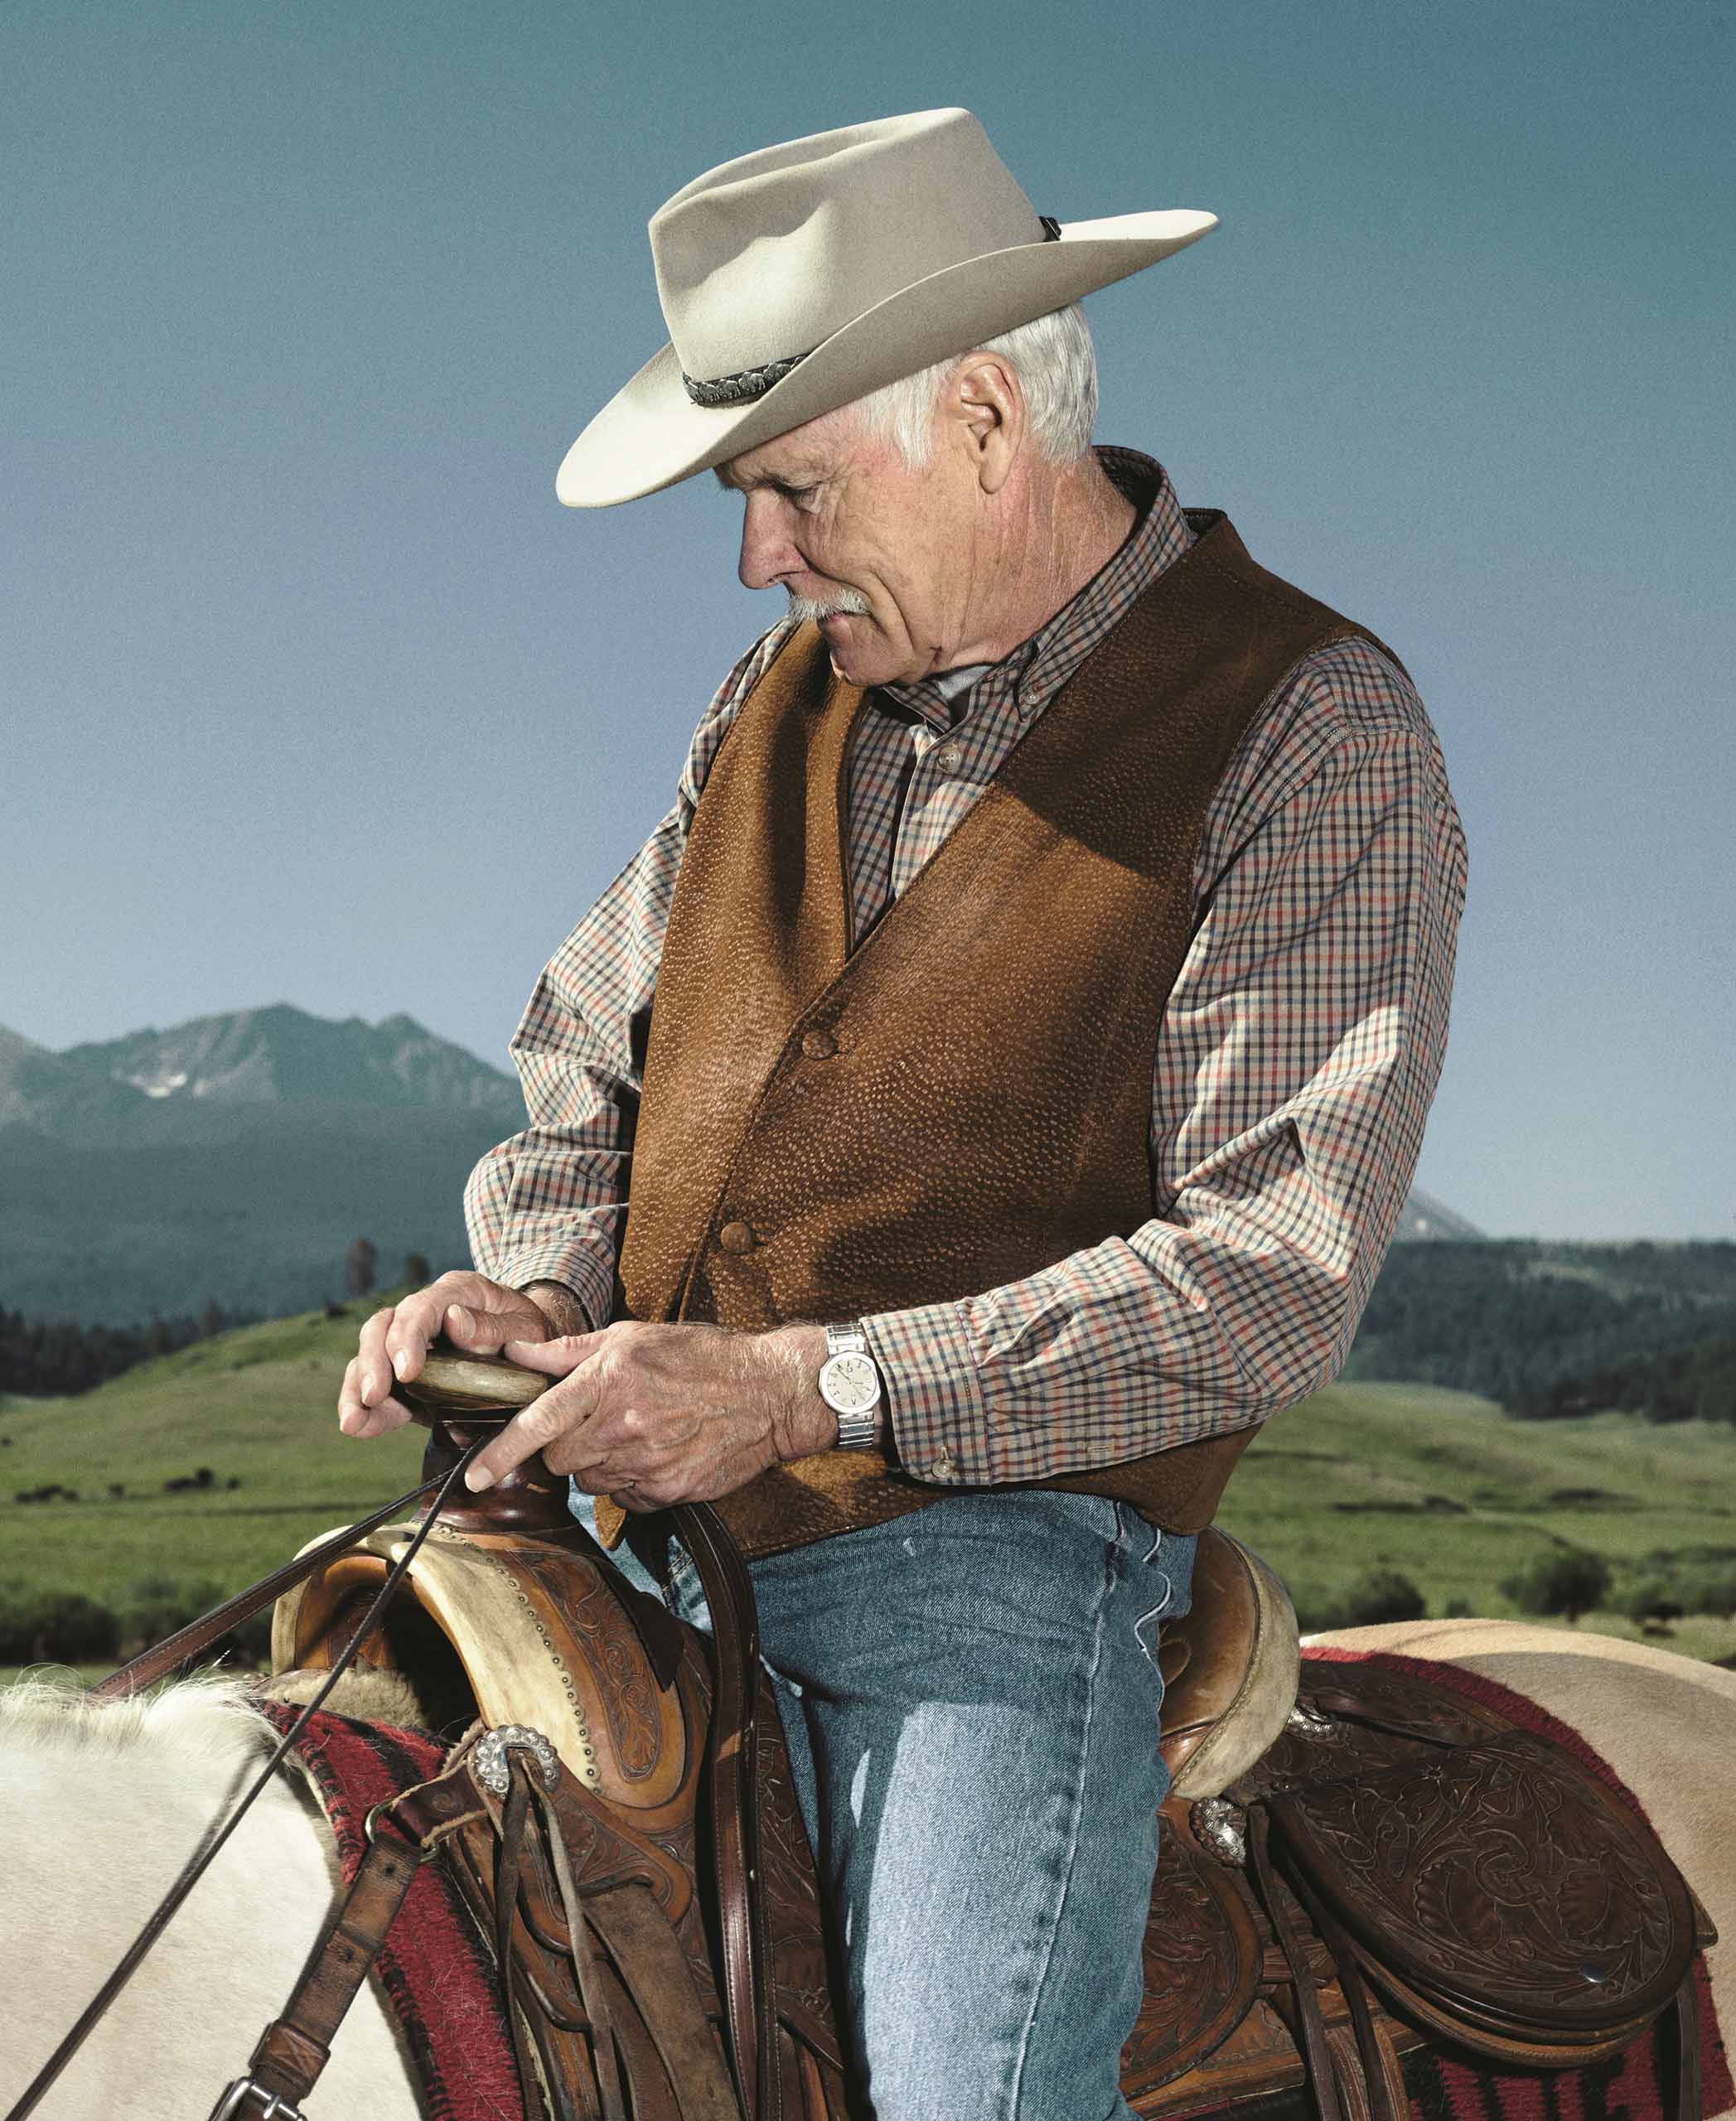 Ted Turner, the second-largest individual landholder in North America, riding at one of his ranches. Photo by Roger Moenks